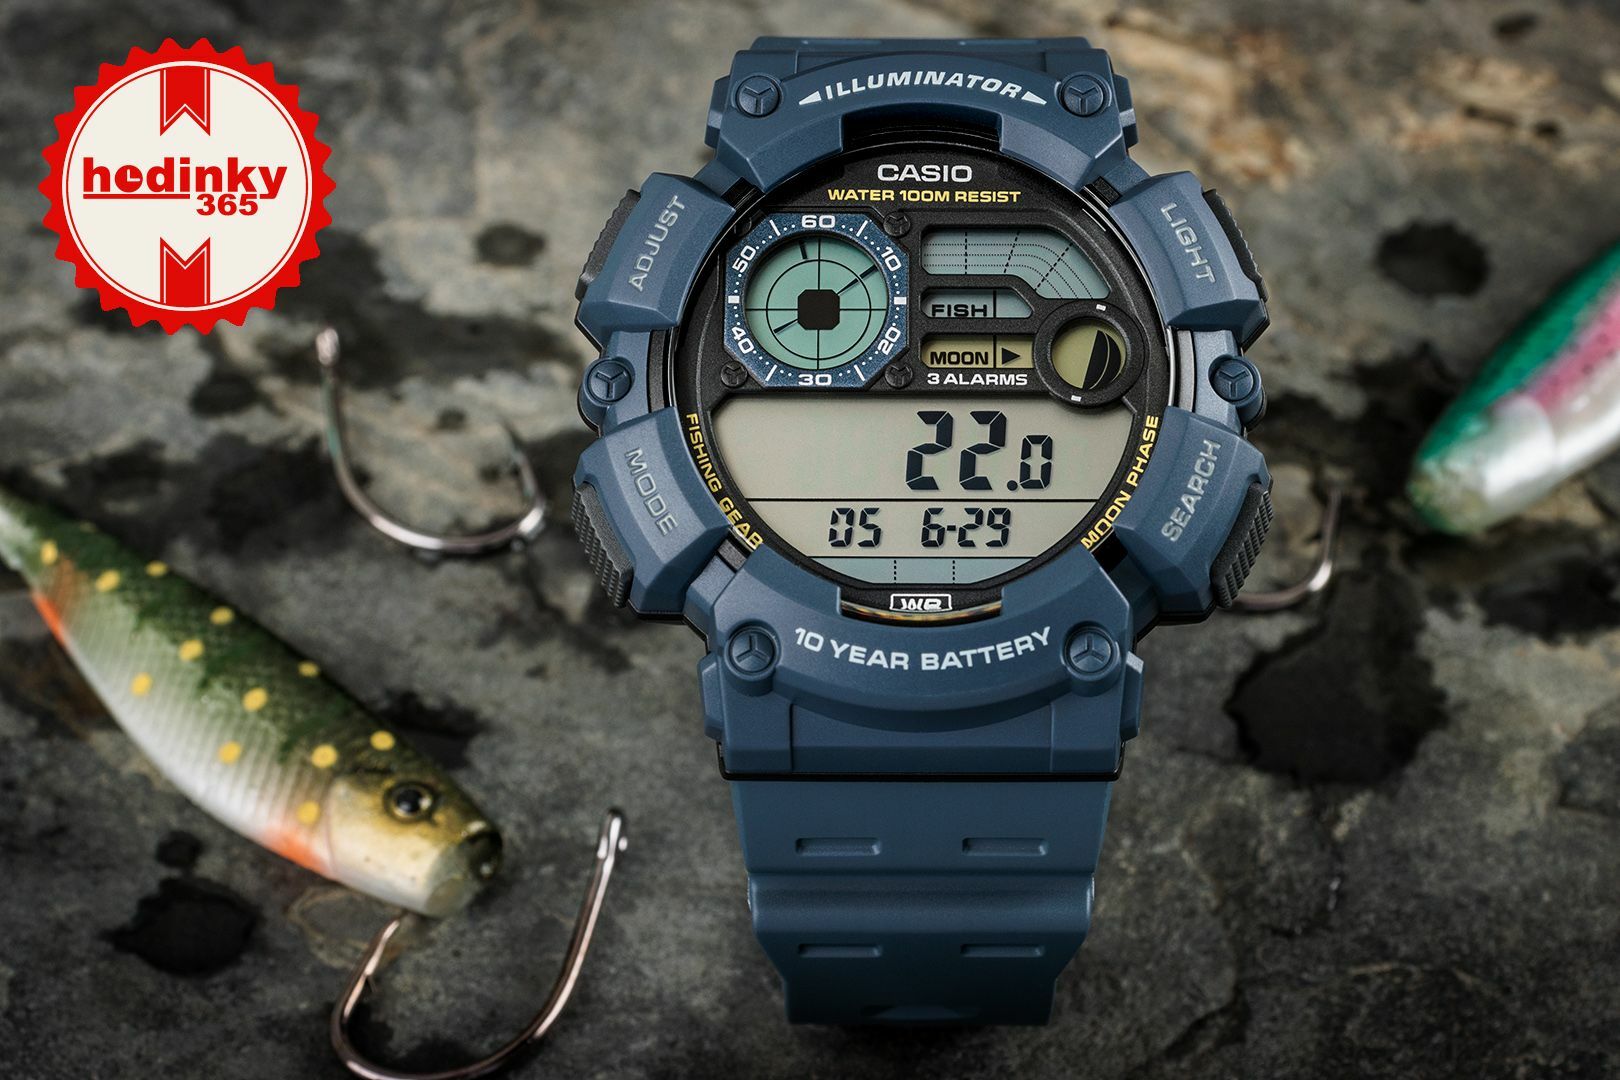 Go Fishing With The Casio WS1500H-1 Fish & Moon Phase Watch